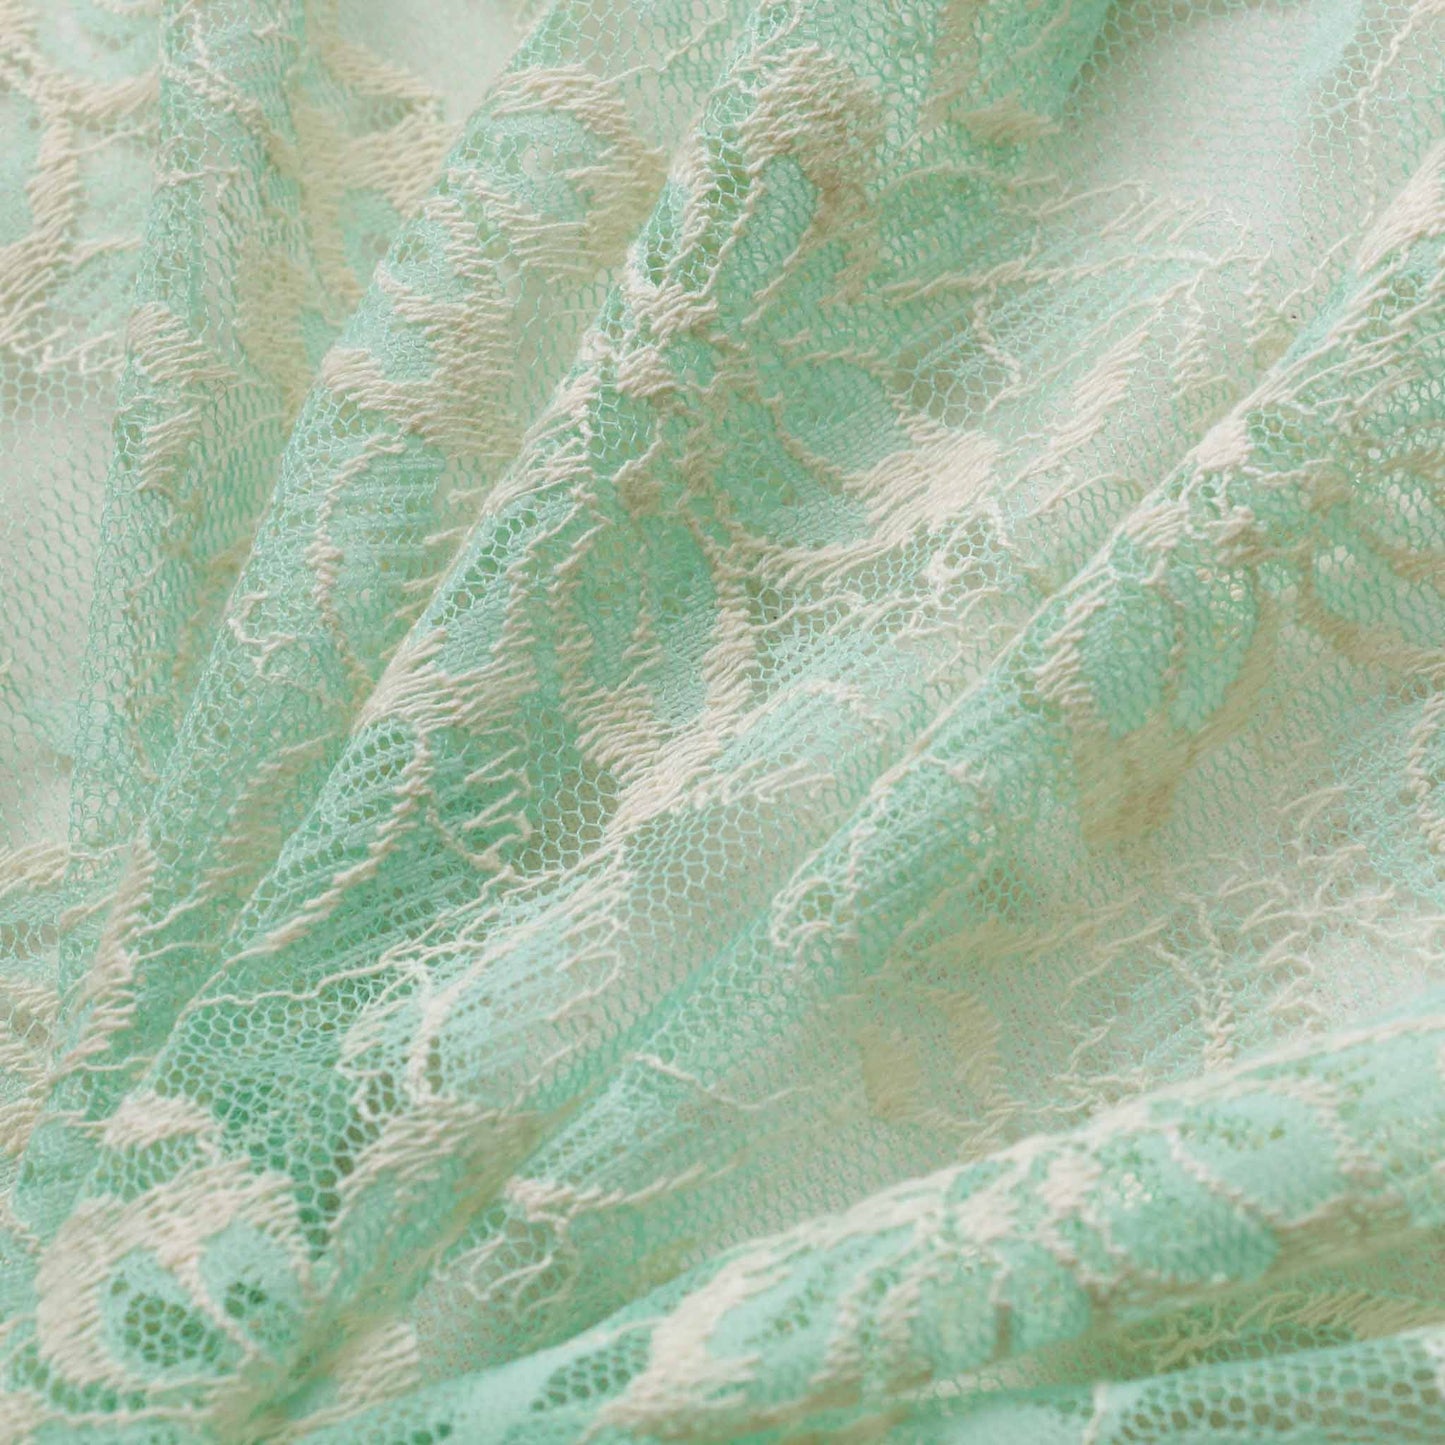 floral dressmaking lace fabric in cool mint and cream with floral delicate pattern